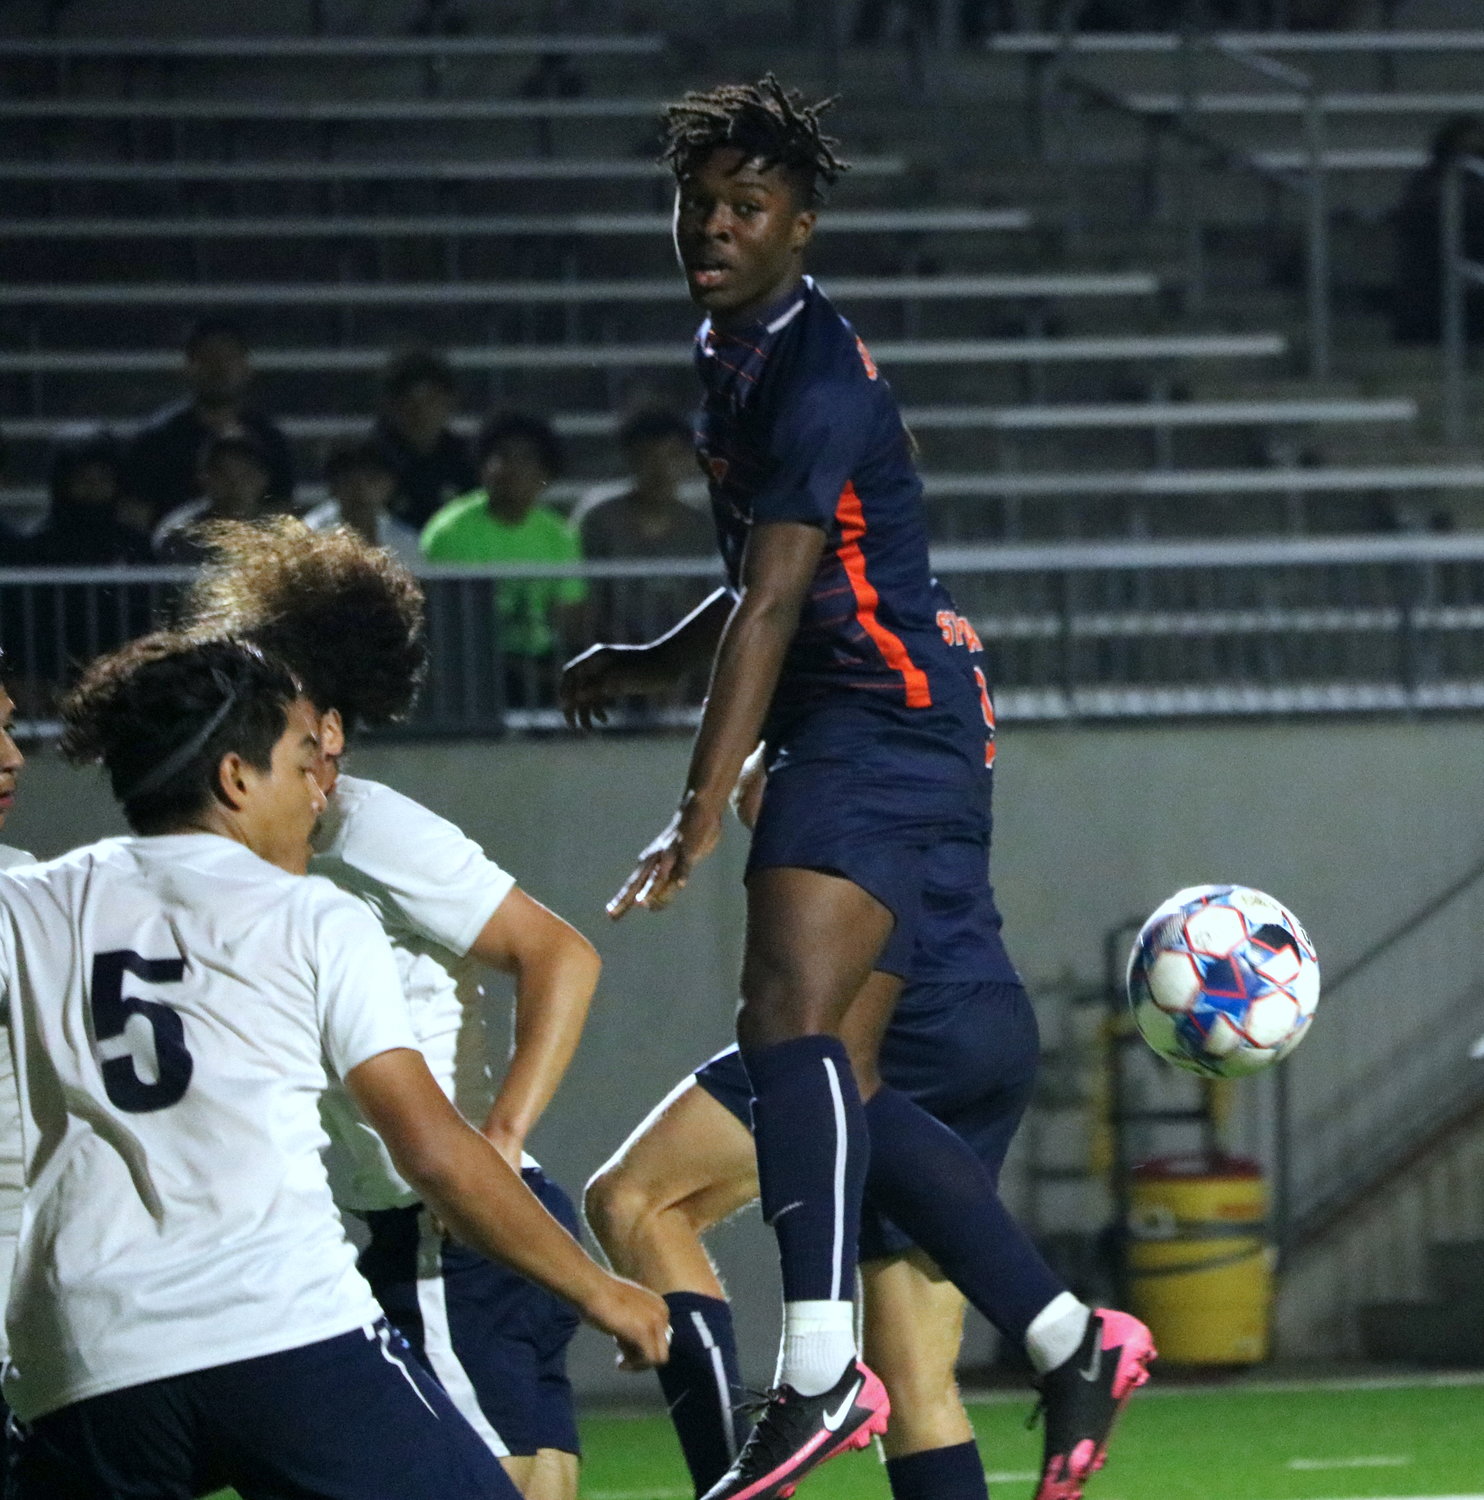 Daniel Ejerenwa heads a ball towards a teammate during Tuesday’s Class 6A area round game between Seven Lakes and Cy-Ridge at Legacy Stadium.